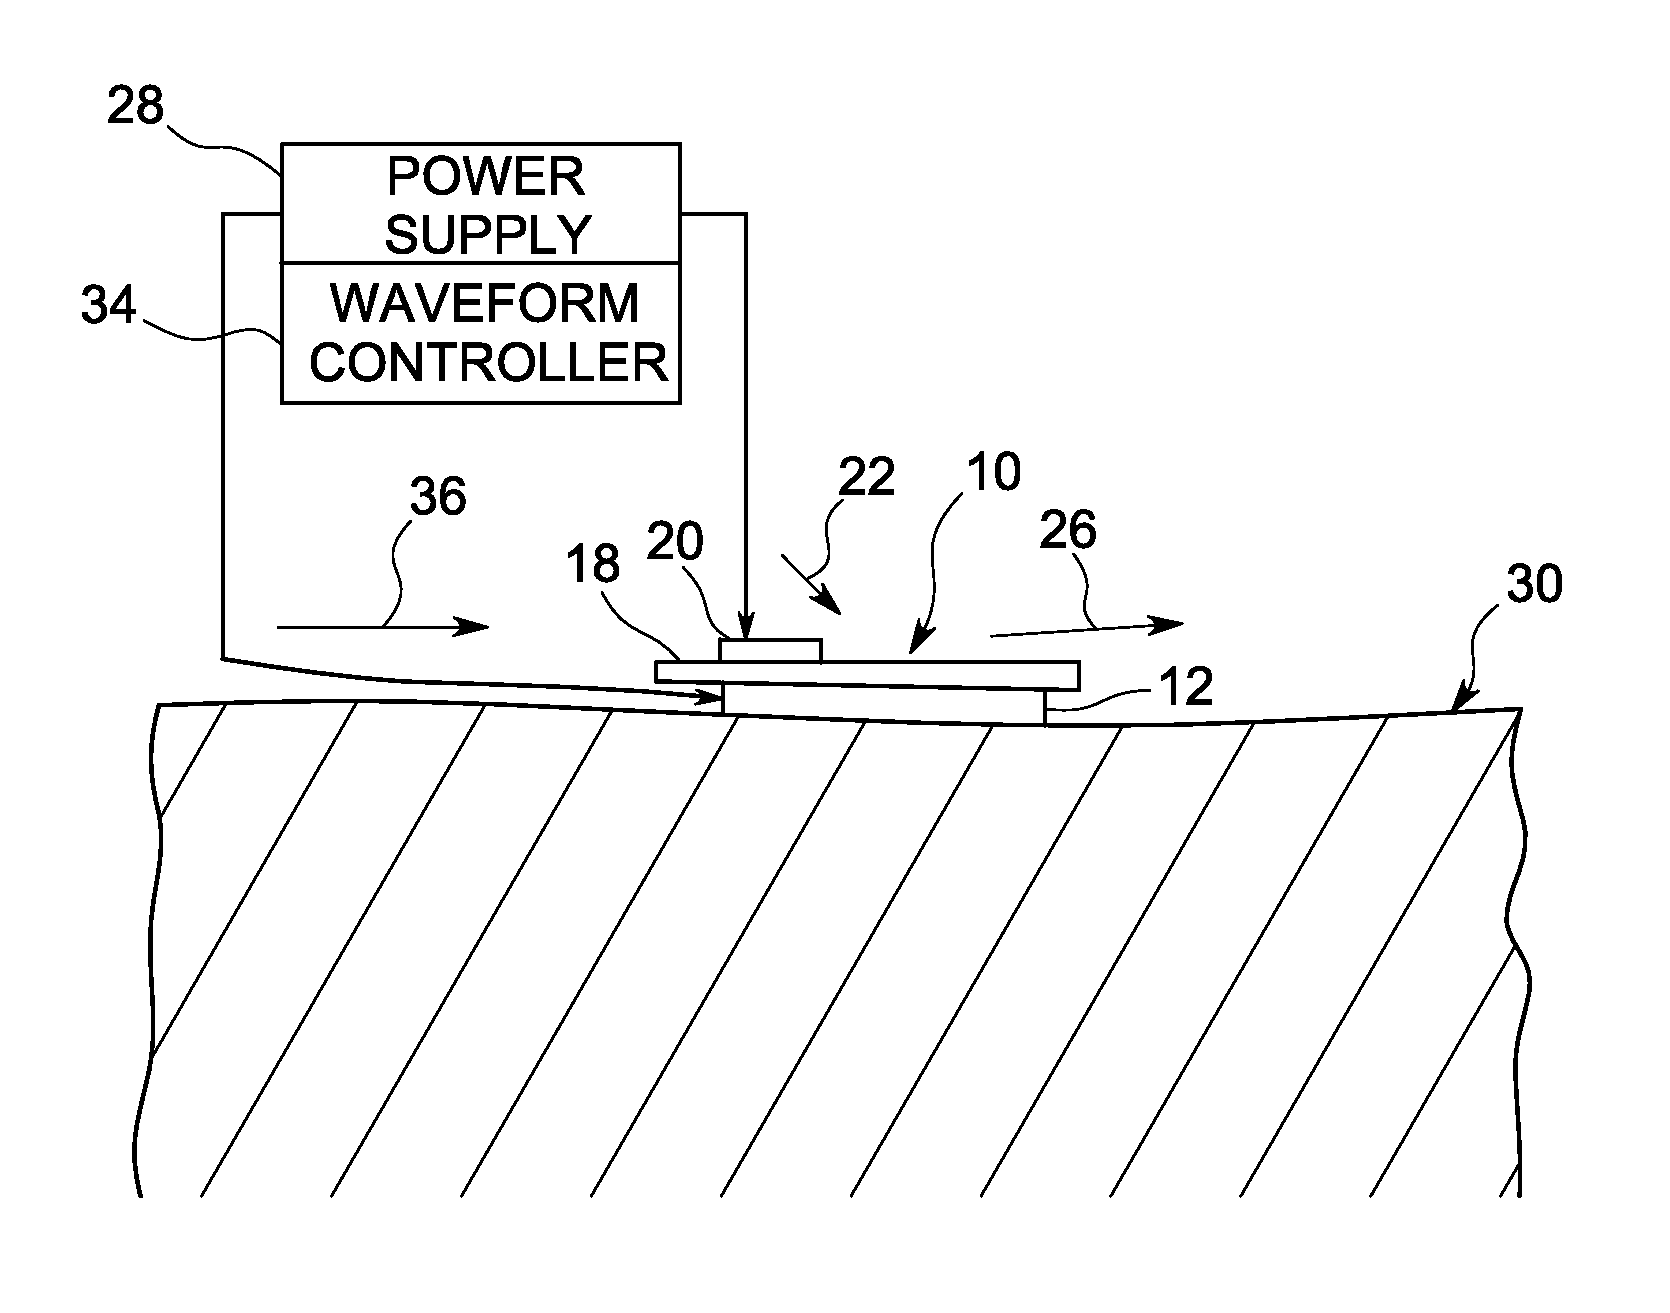 System and method of deicing and prevention or delay of flow separation over wind turbine blades